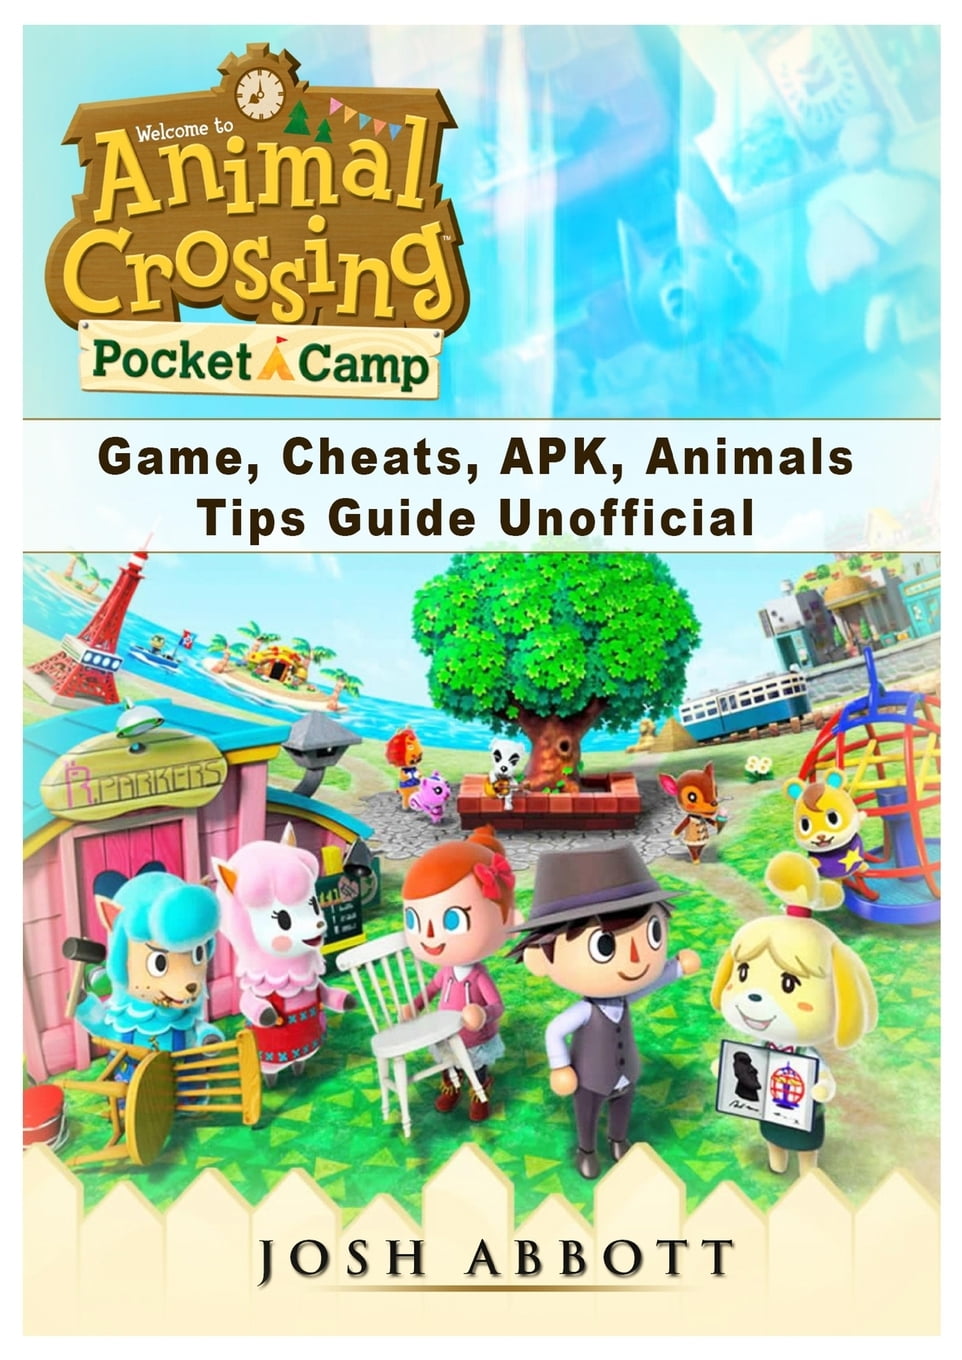 Animal Crossing Pocket Camp Game Cheats Apk Animals Tips Guide